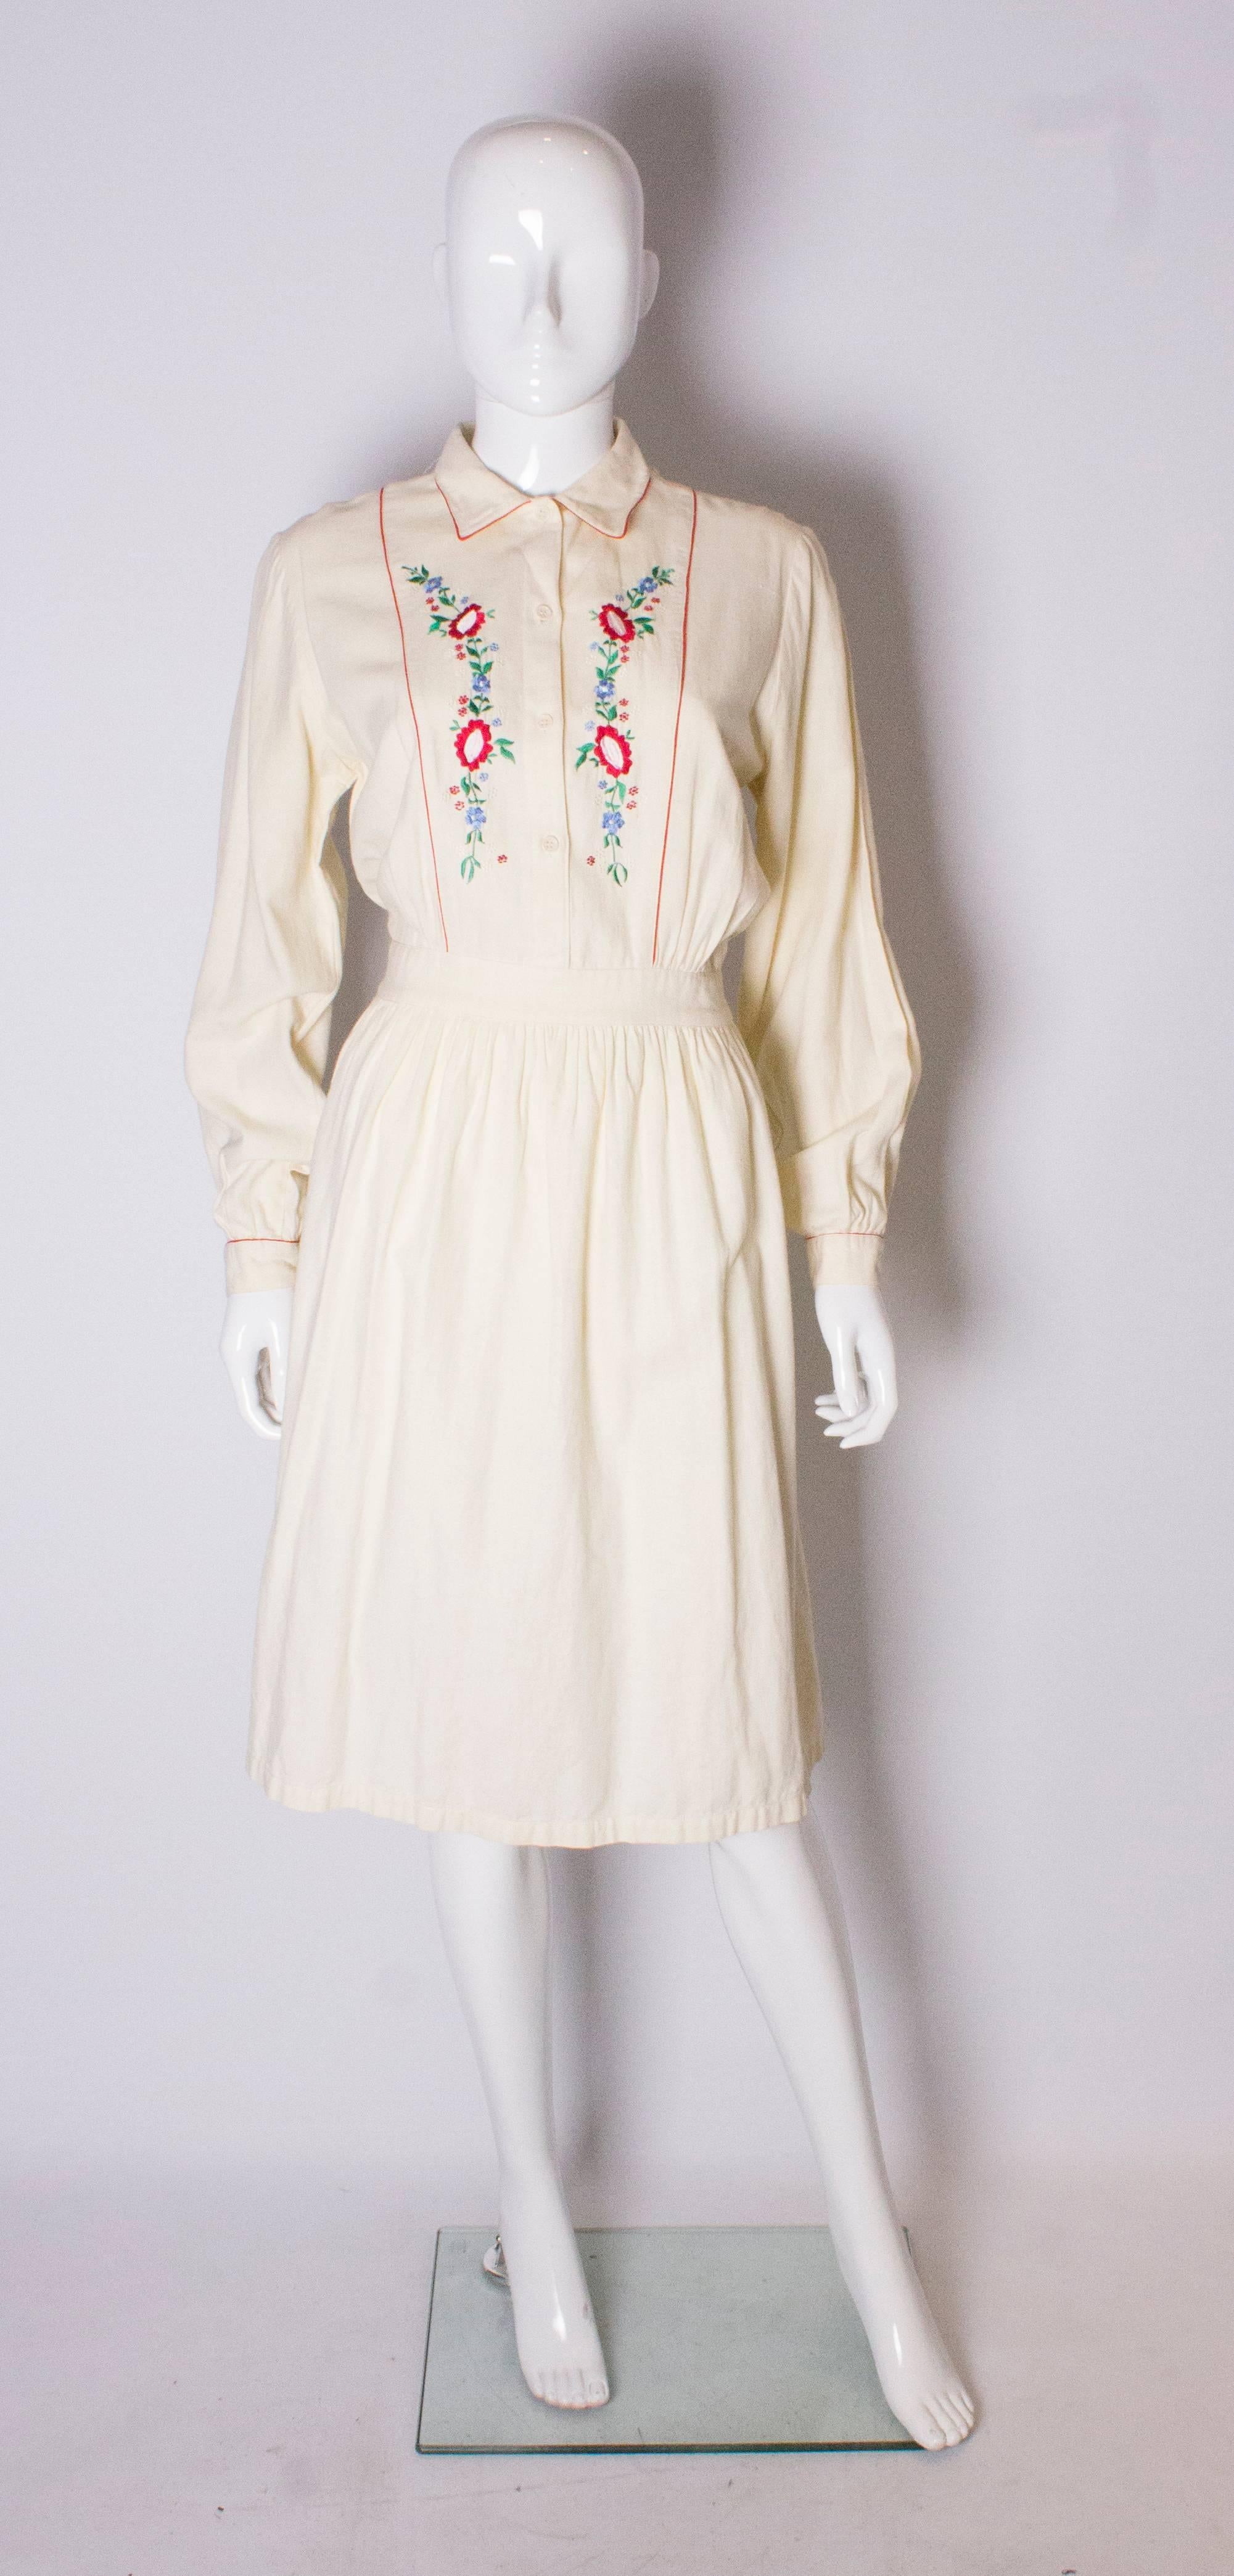 A pretty vintage day dress by Miss Selfridge. The dress is in an ivory brushed cotton with embroidery on the front , and red piping on the collar and cuffs.The dress has a 4  button opening at the front and self fabric tie backs, so can be adjusted